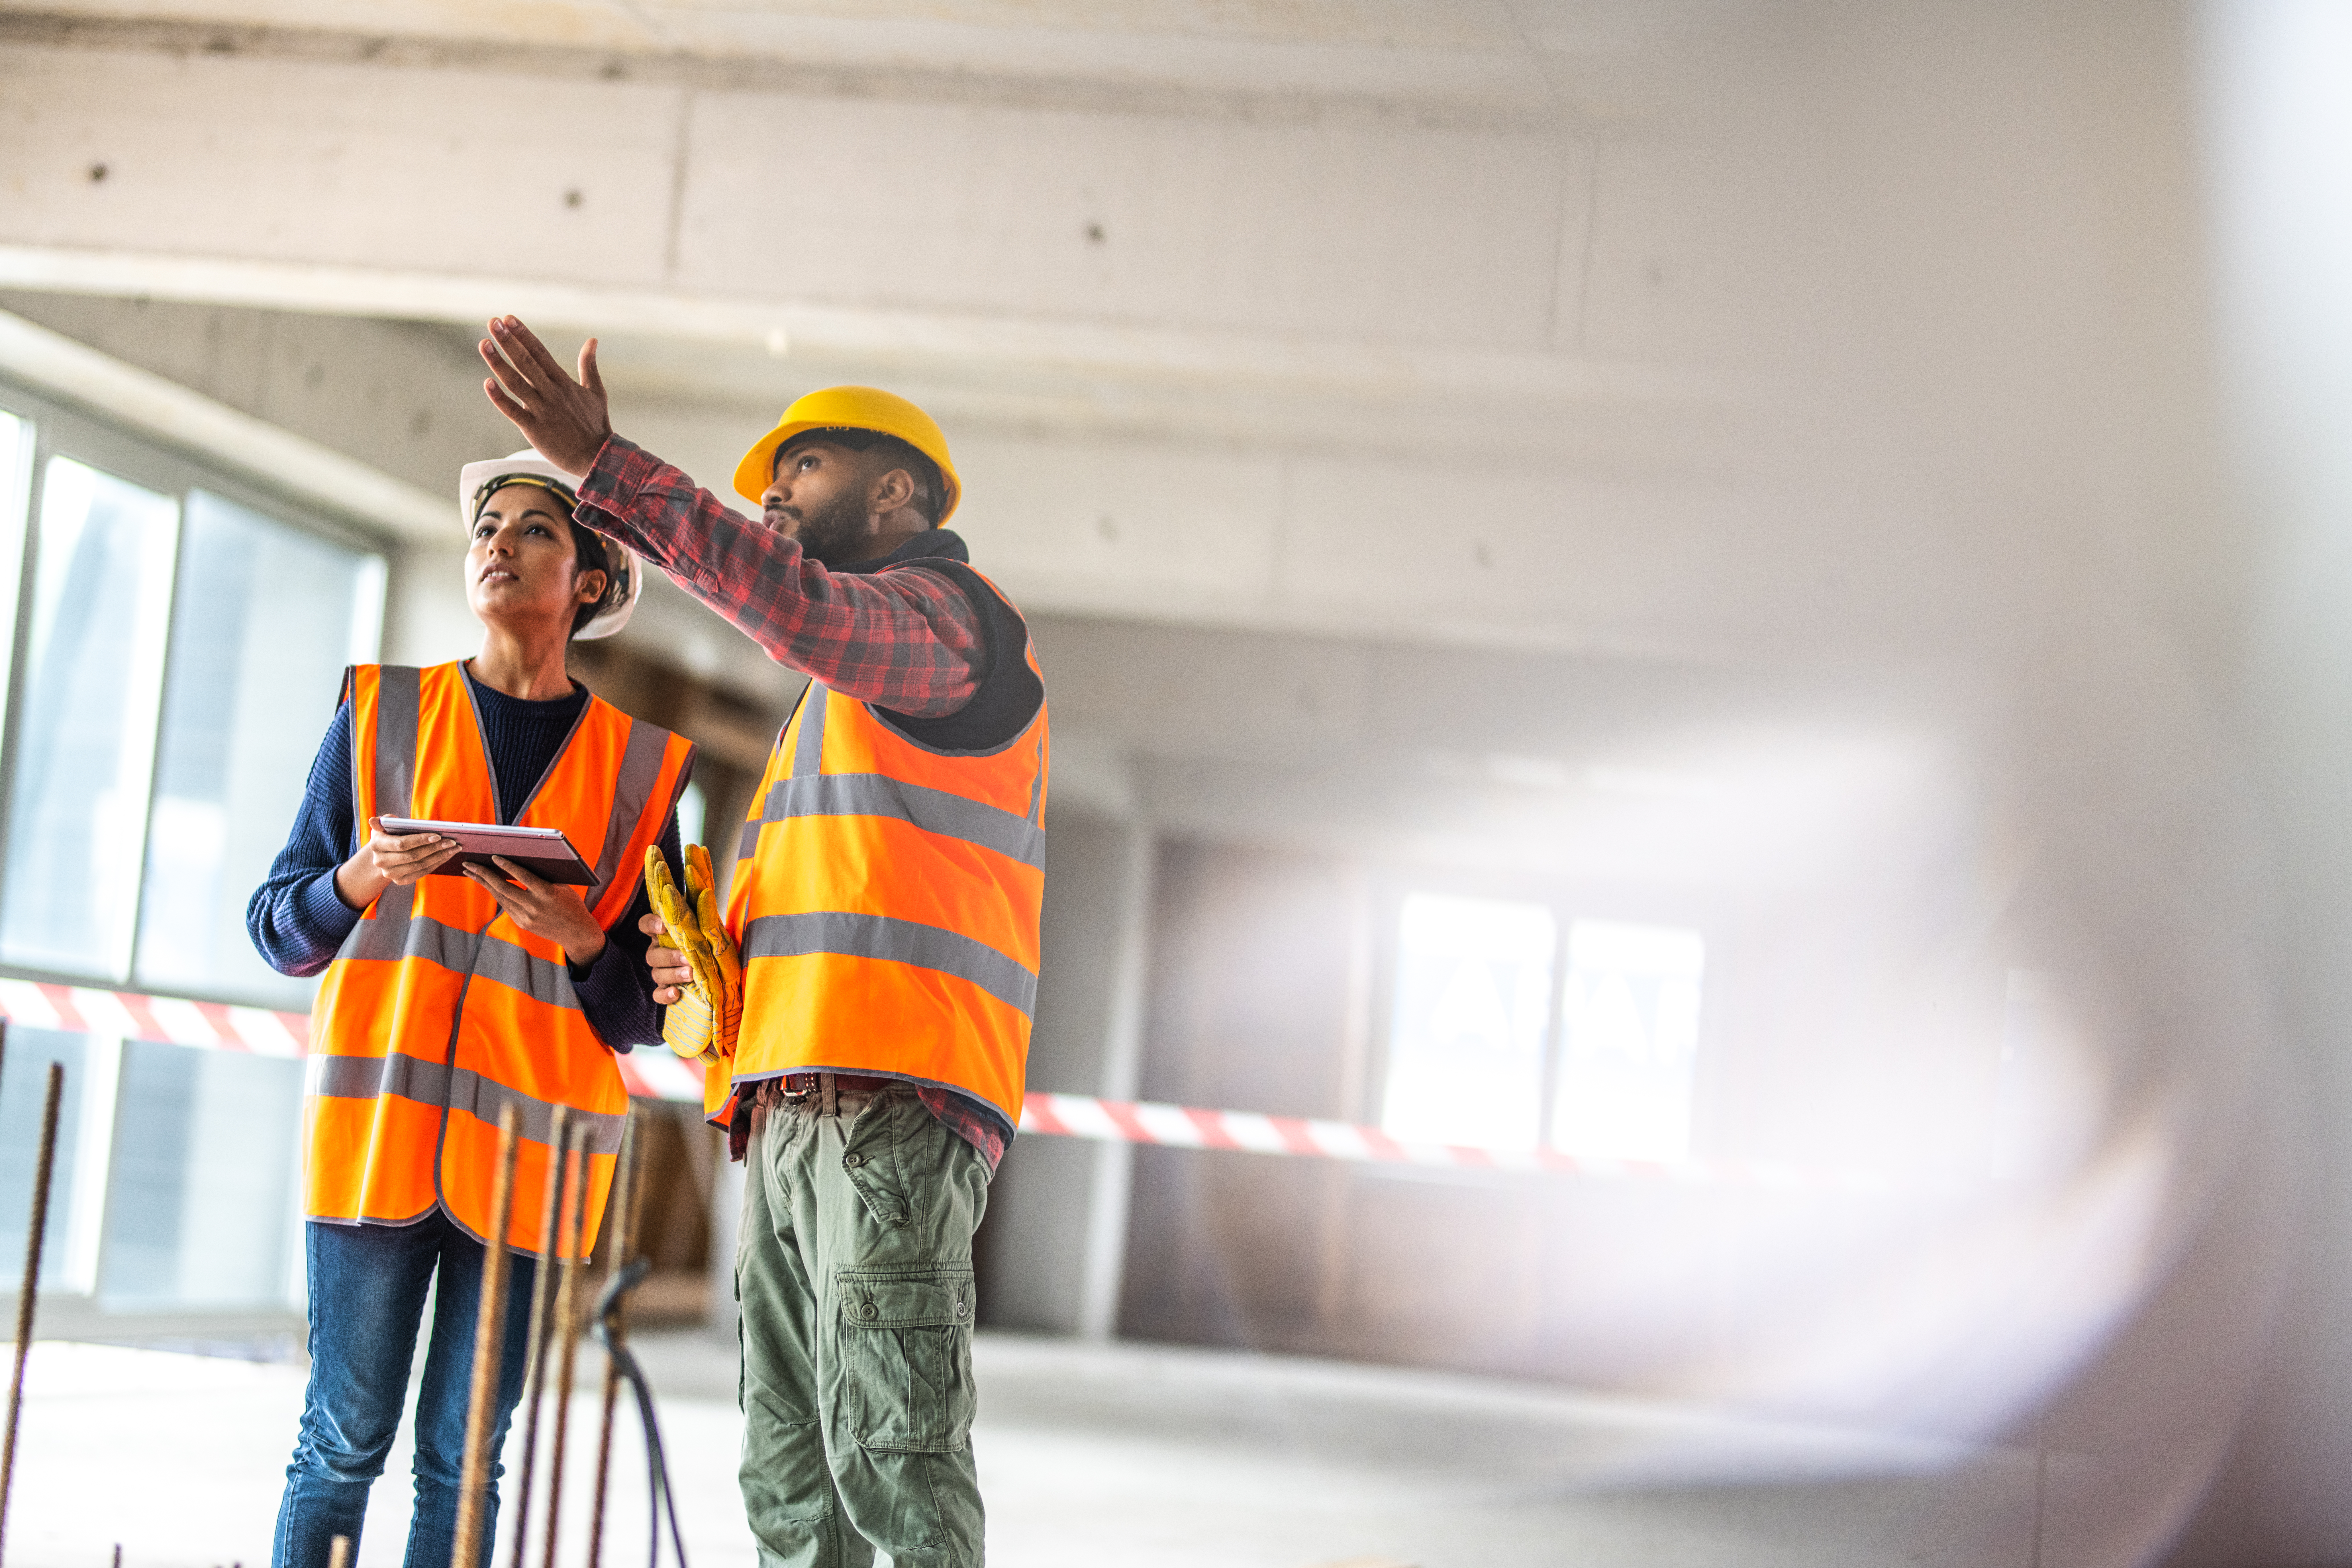 What are 'contractors' and what do they typically do? 